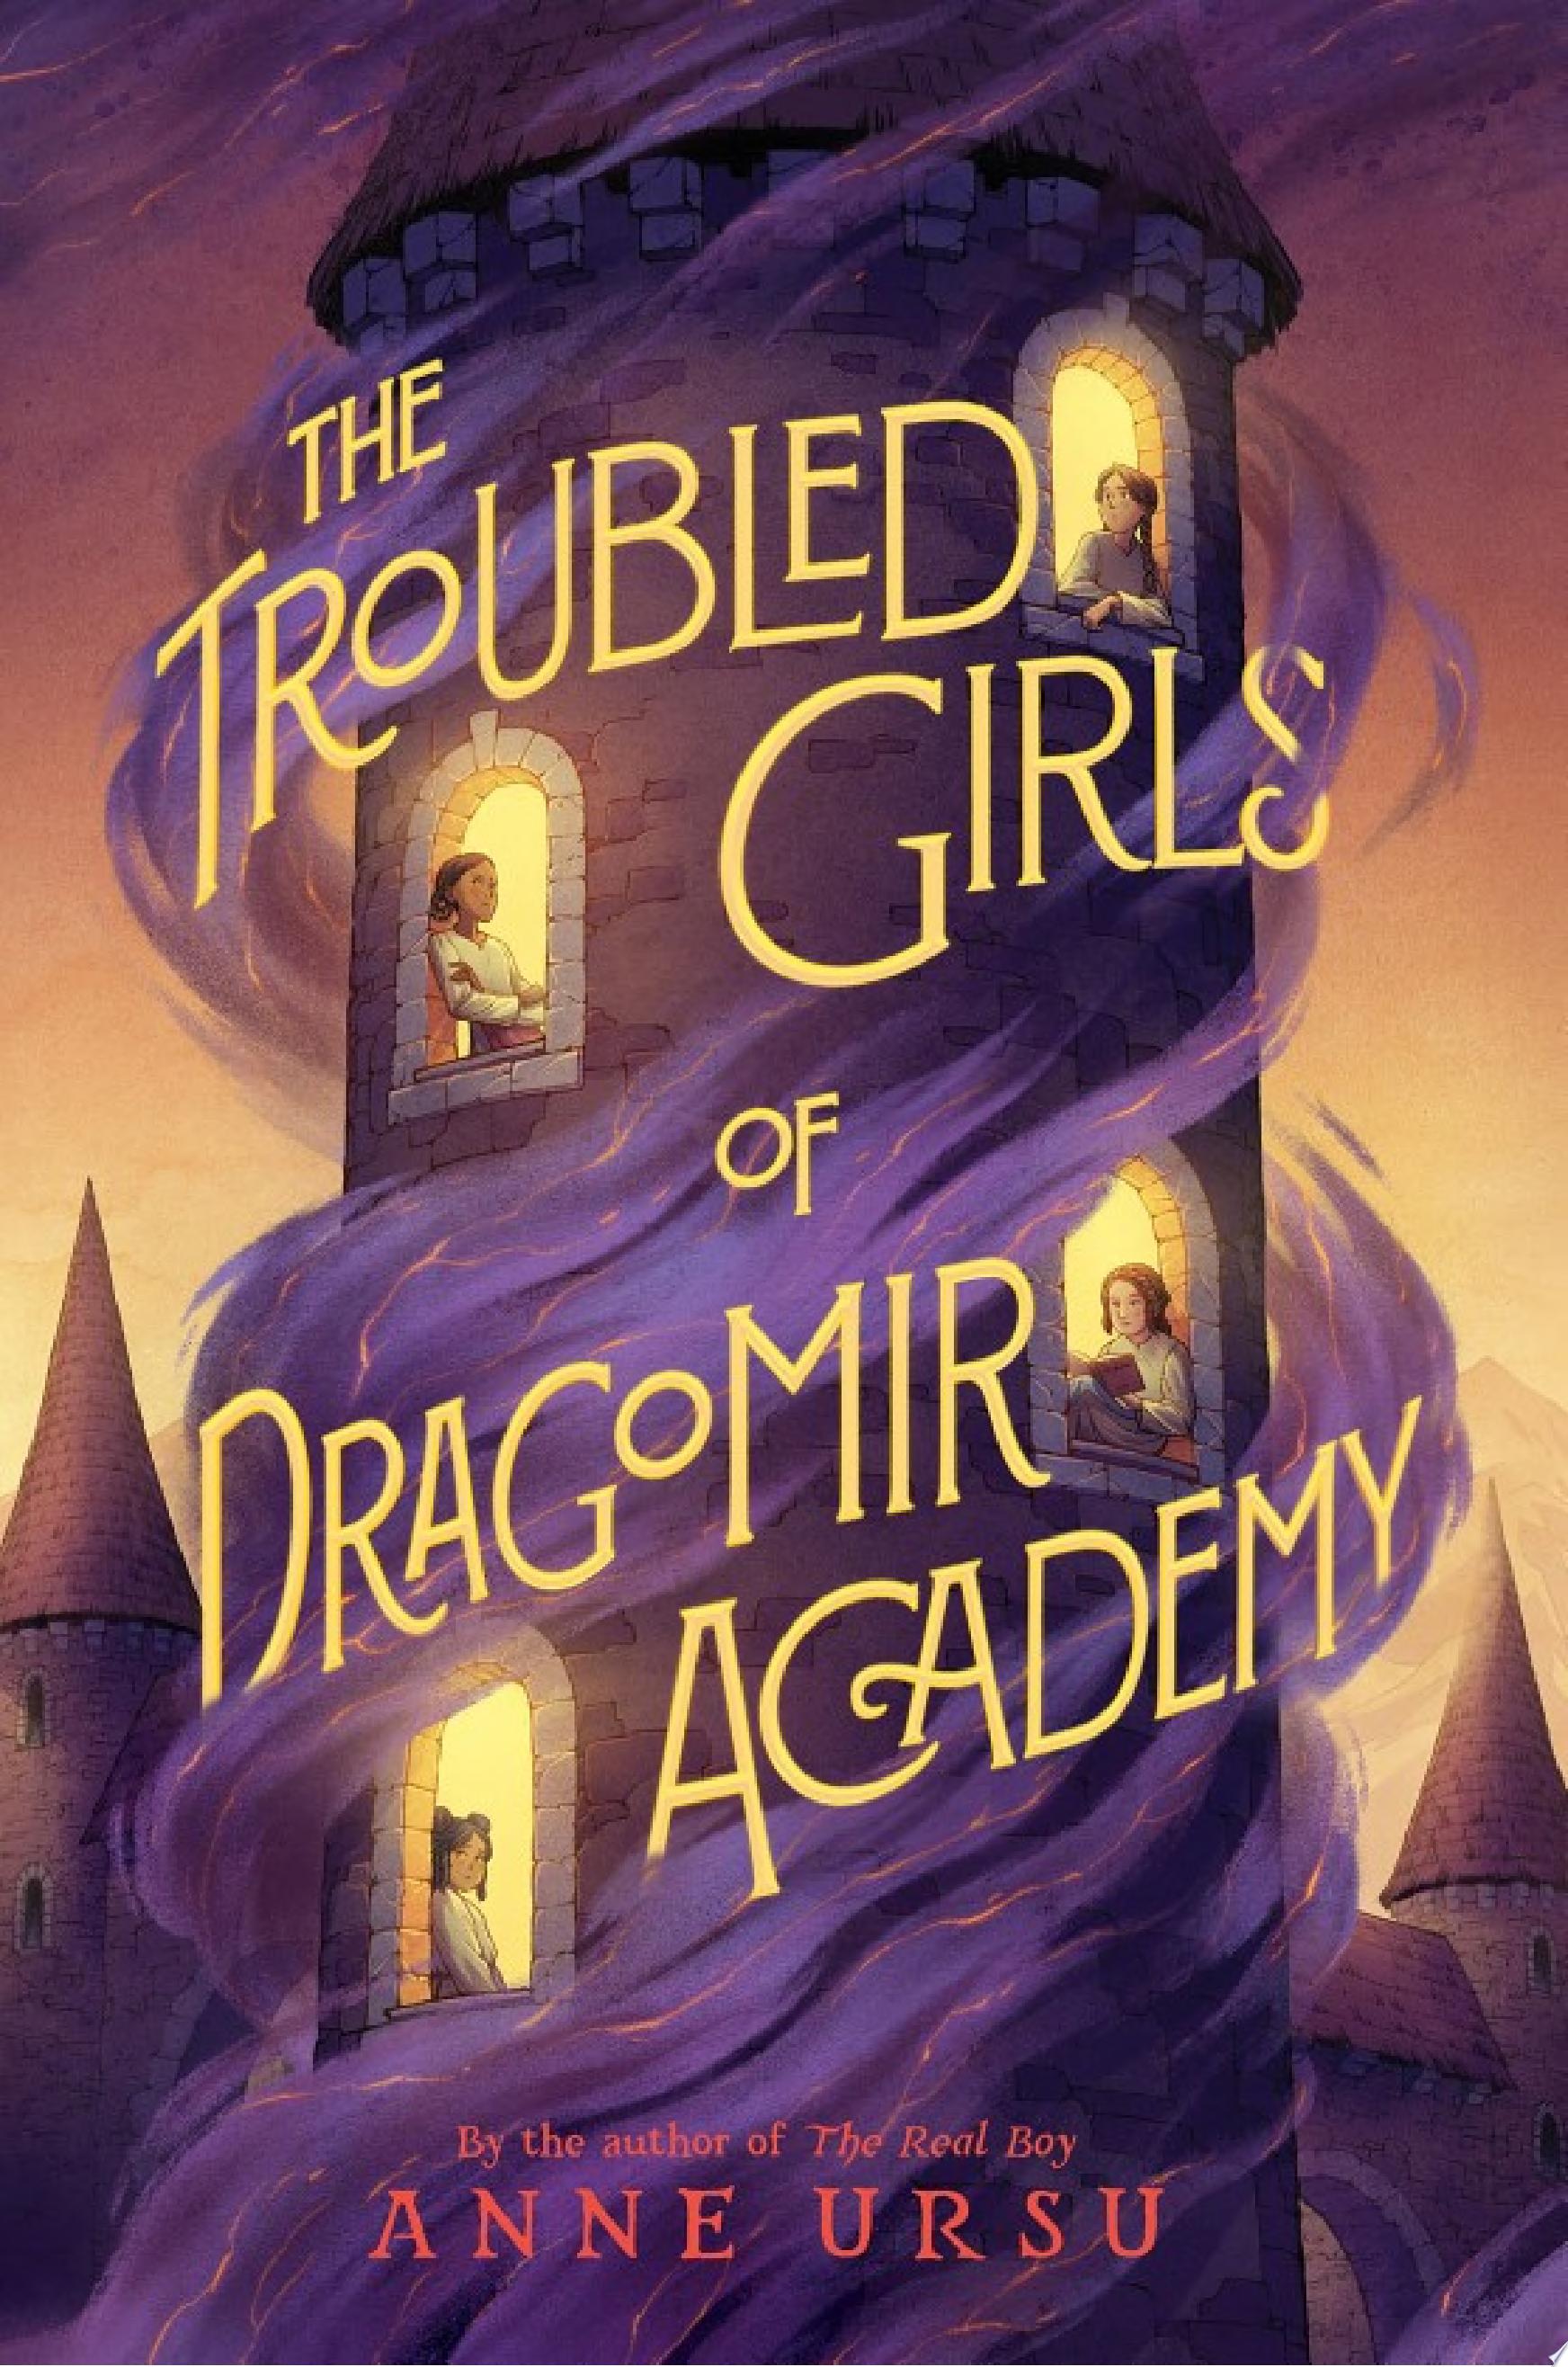 Image for "The Troubled Girls of Dragomir Academy"